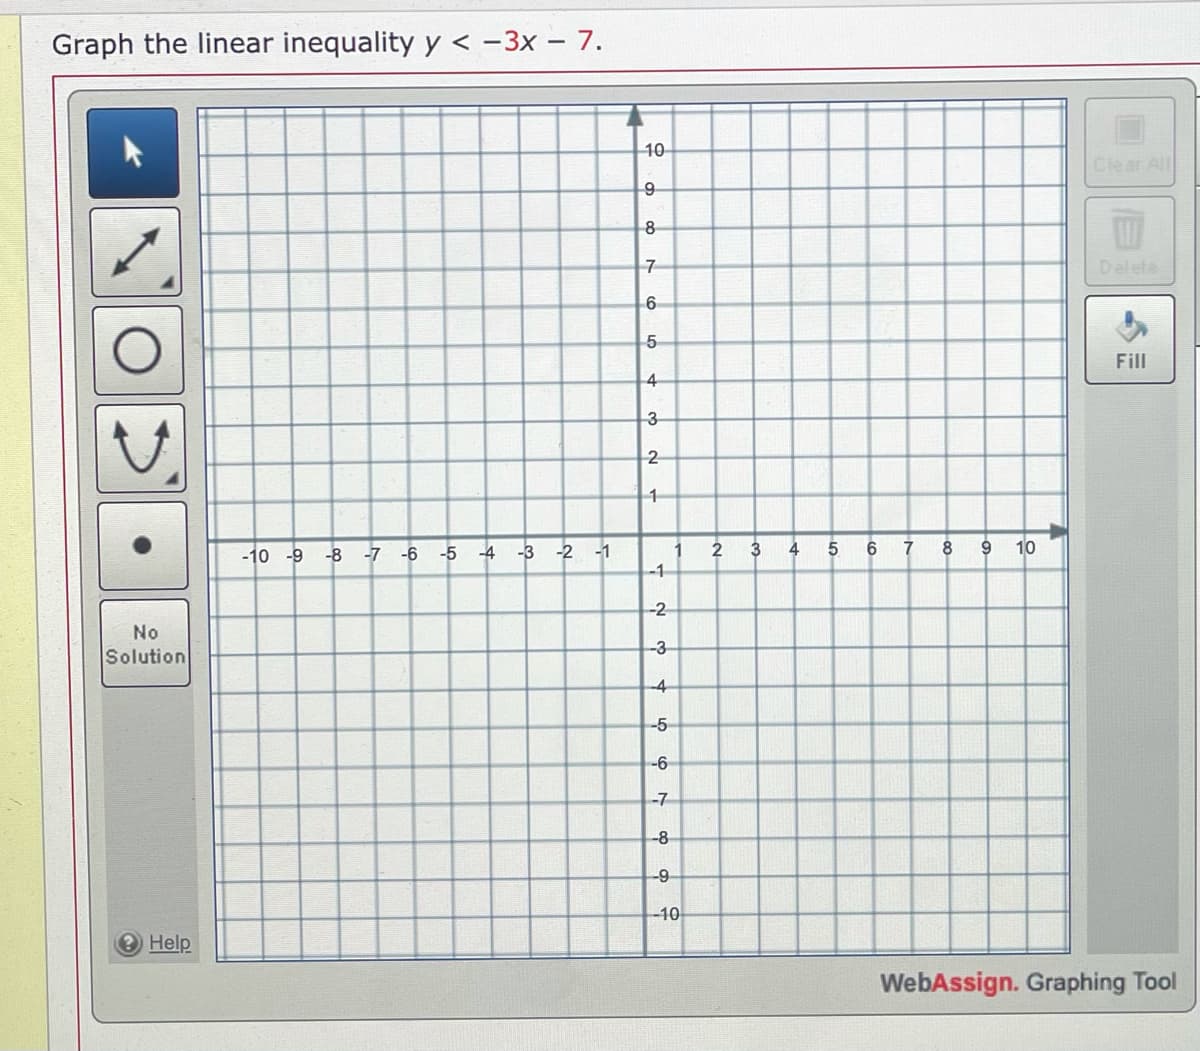 Graph the linear inequality y < -3x – 7.
10
Clear All
8
Delete
6
Fill
4
3
2
-10 -9
-8
-7 -6
-5
-4
-3 -2 -1
2
3
4
5
6
8
10
-1
-2
No
Solution
-3
-4
-5
-6
-7
-8
-9-
-10
Help
WebAssign. Graphing Tool
